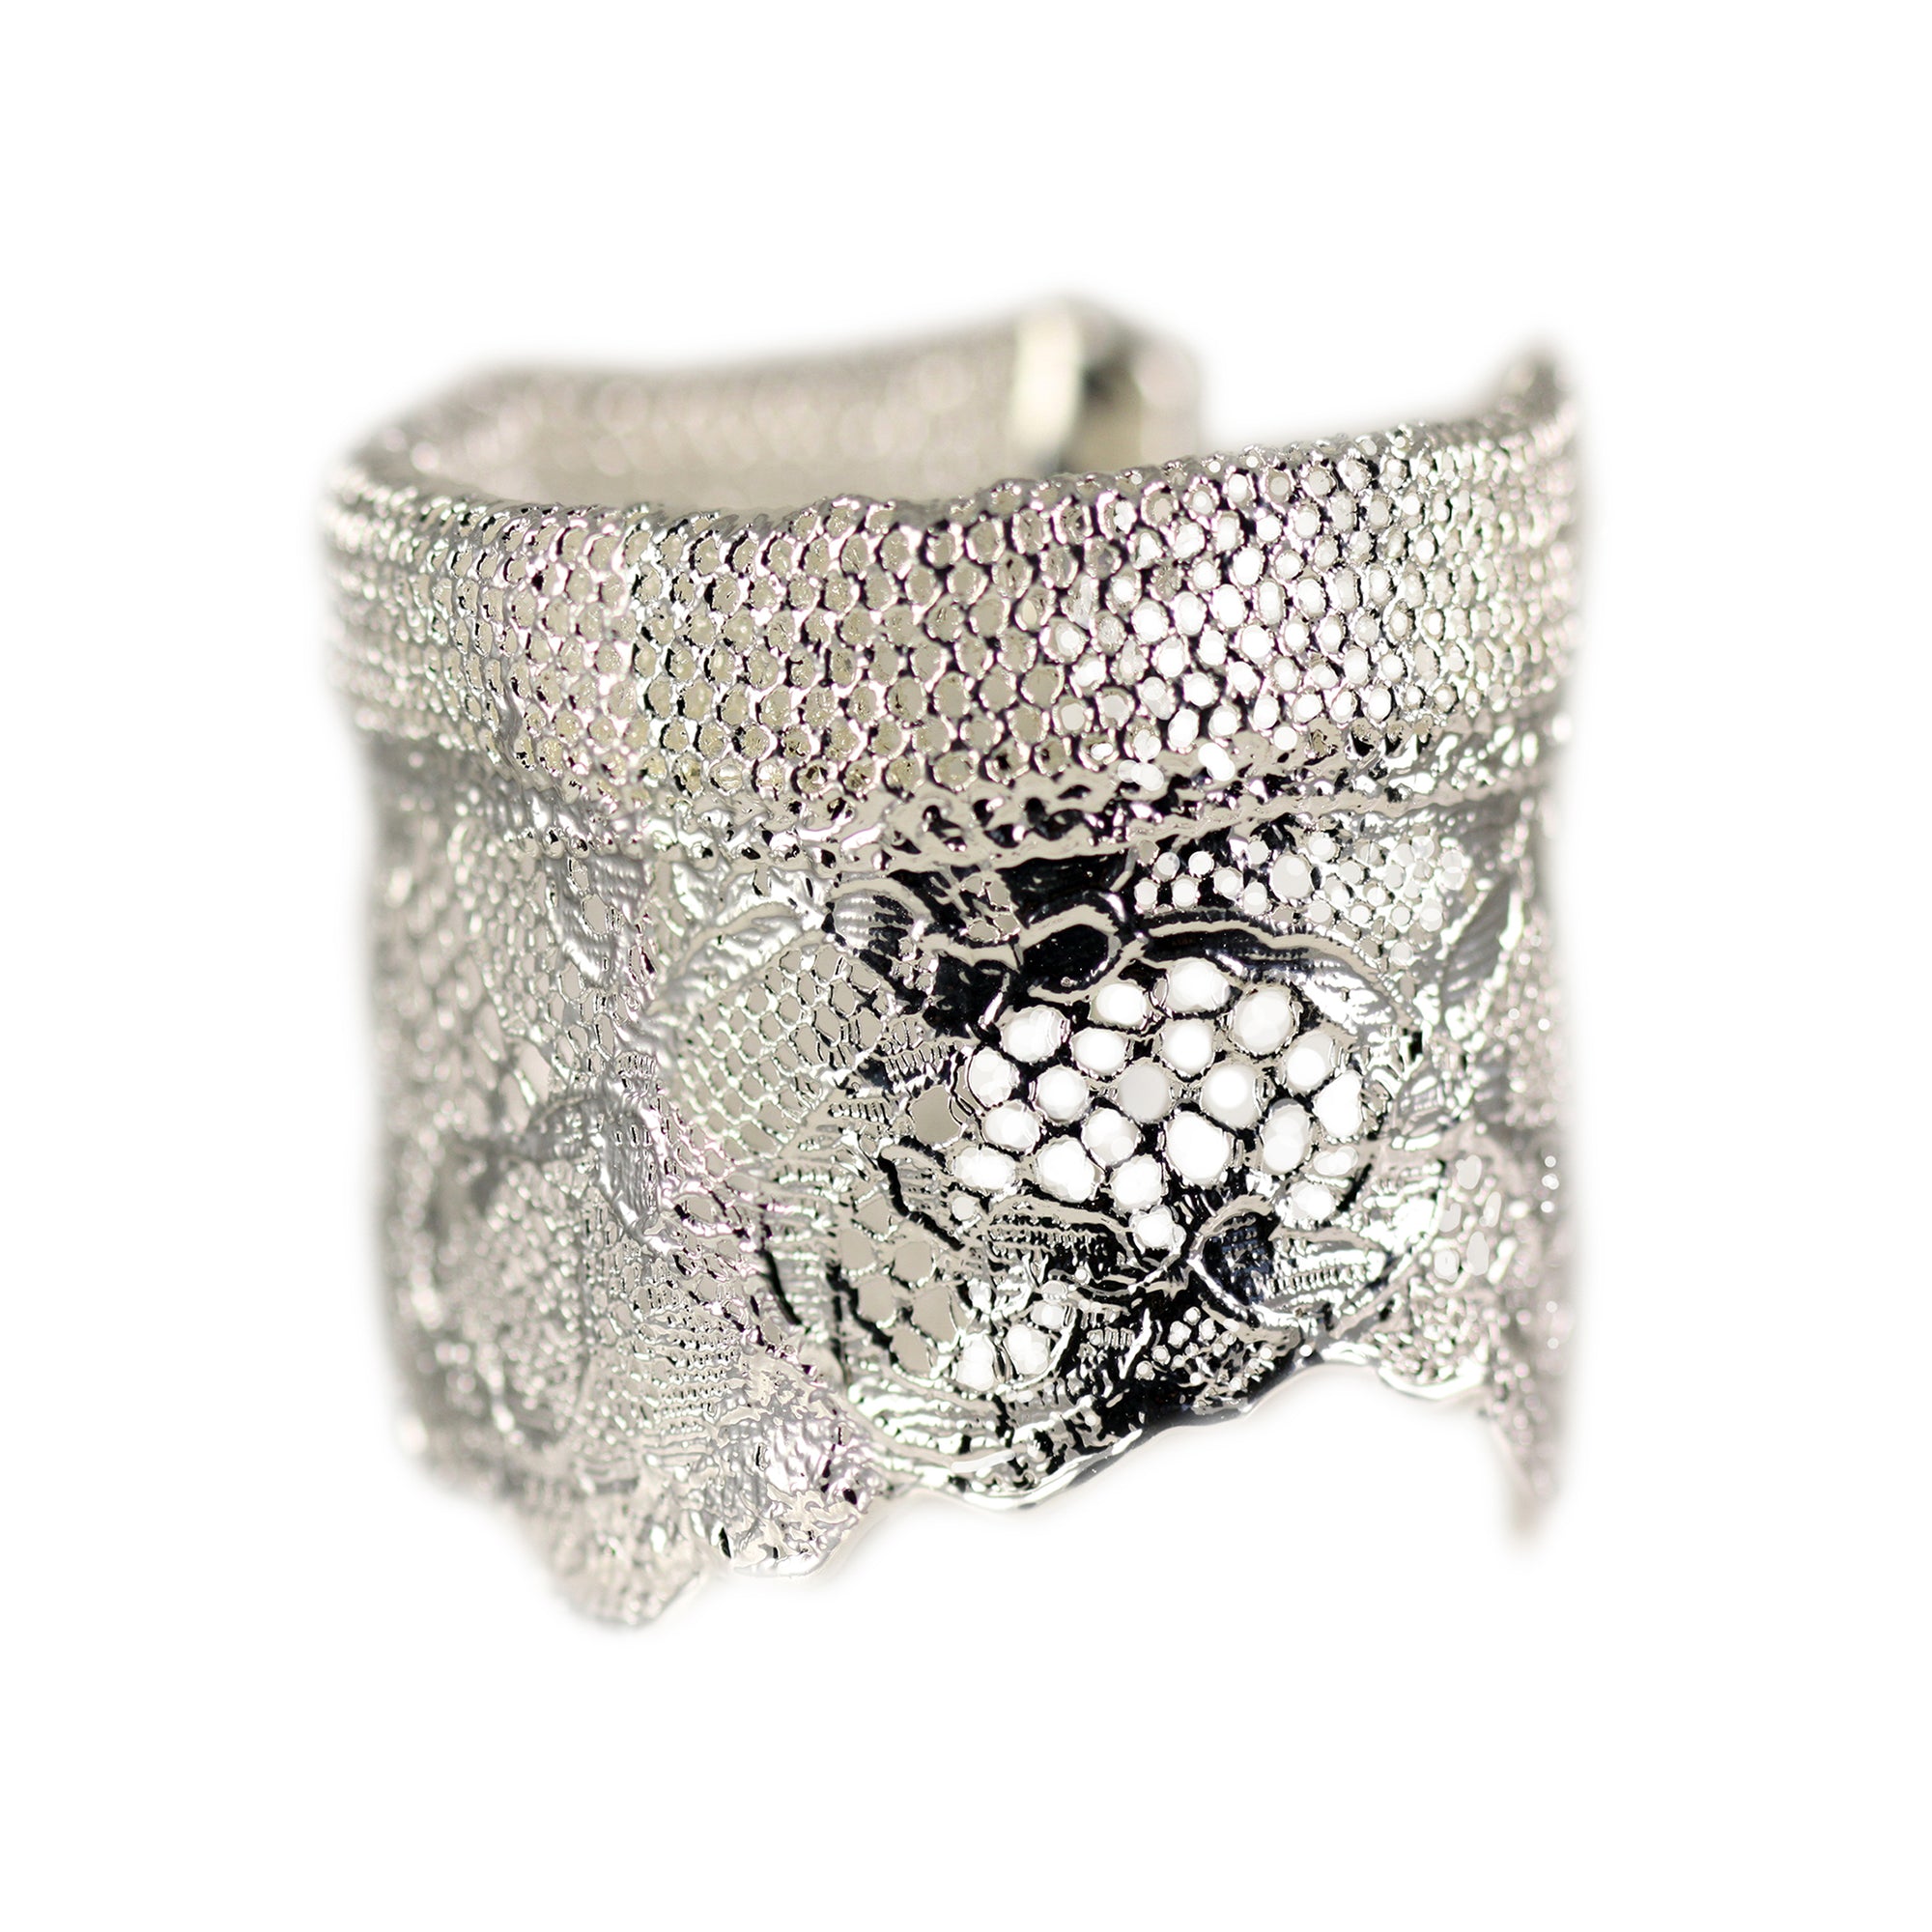 Silver lace cuff bracelet, mix of feminine lace and masculine mesh. Dipped in sterling silver. Great 13th anniversary gift.